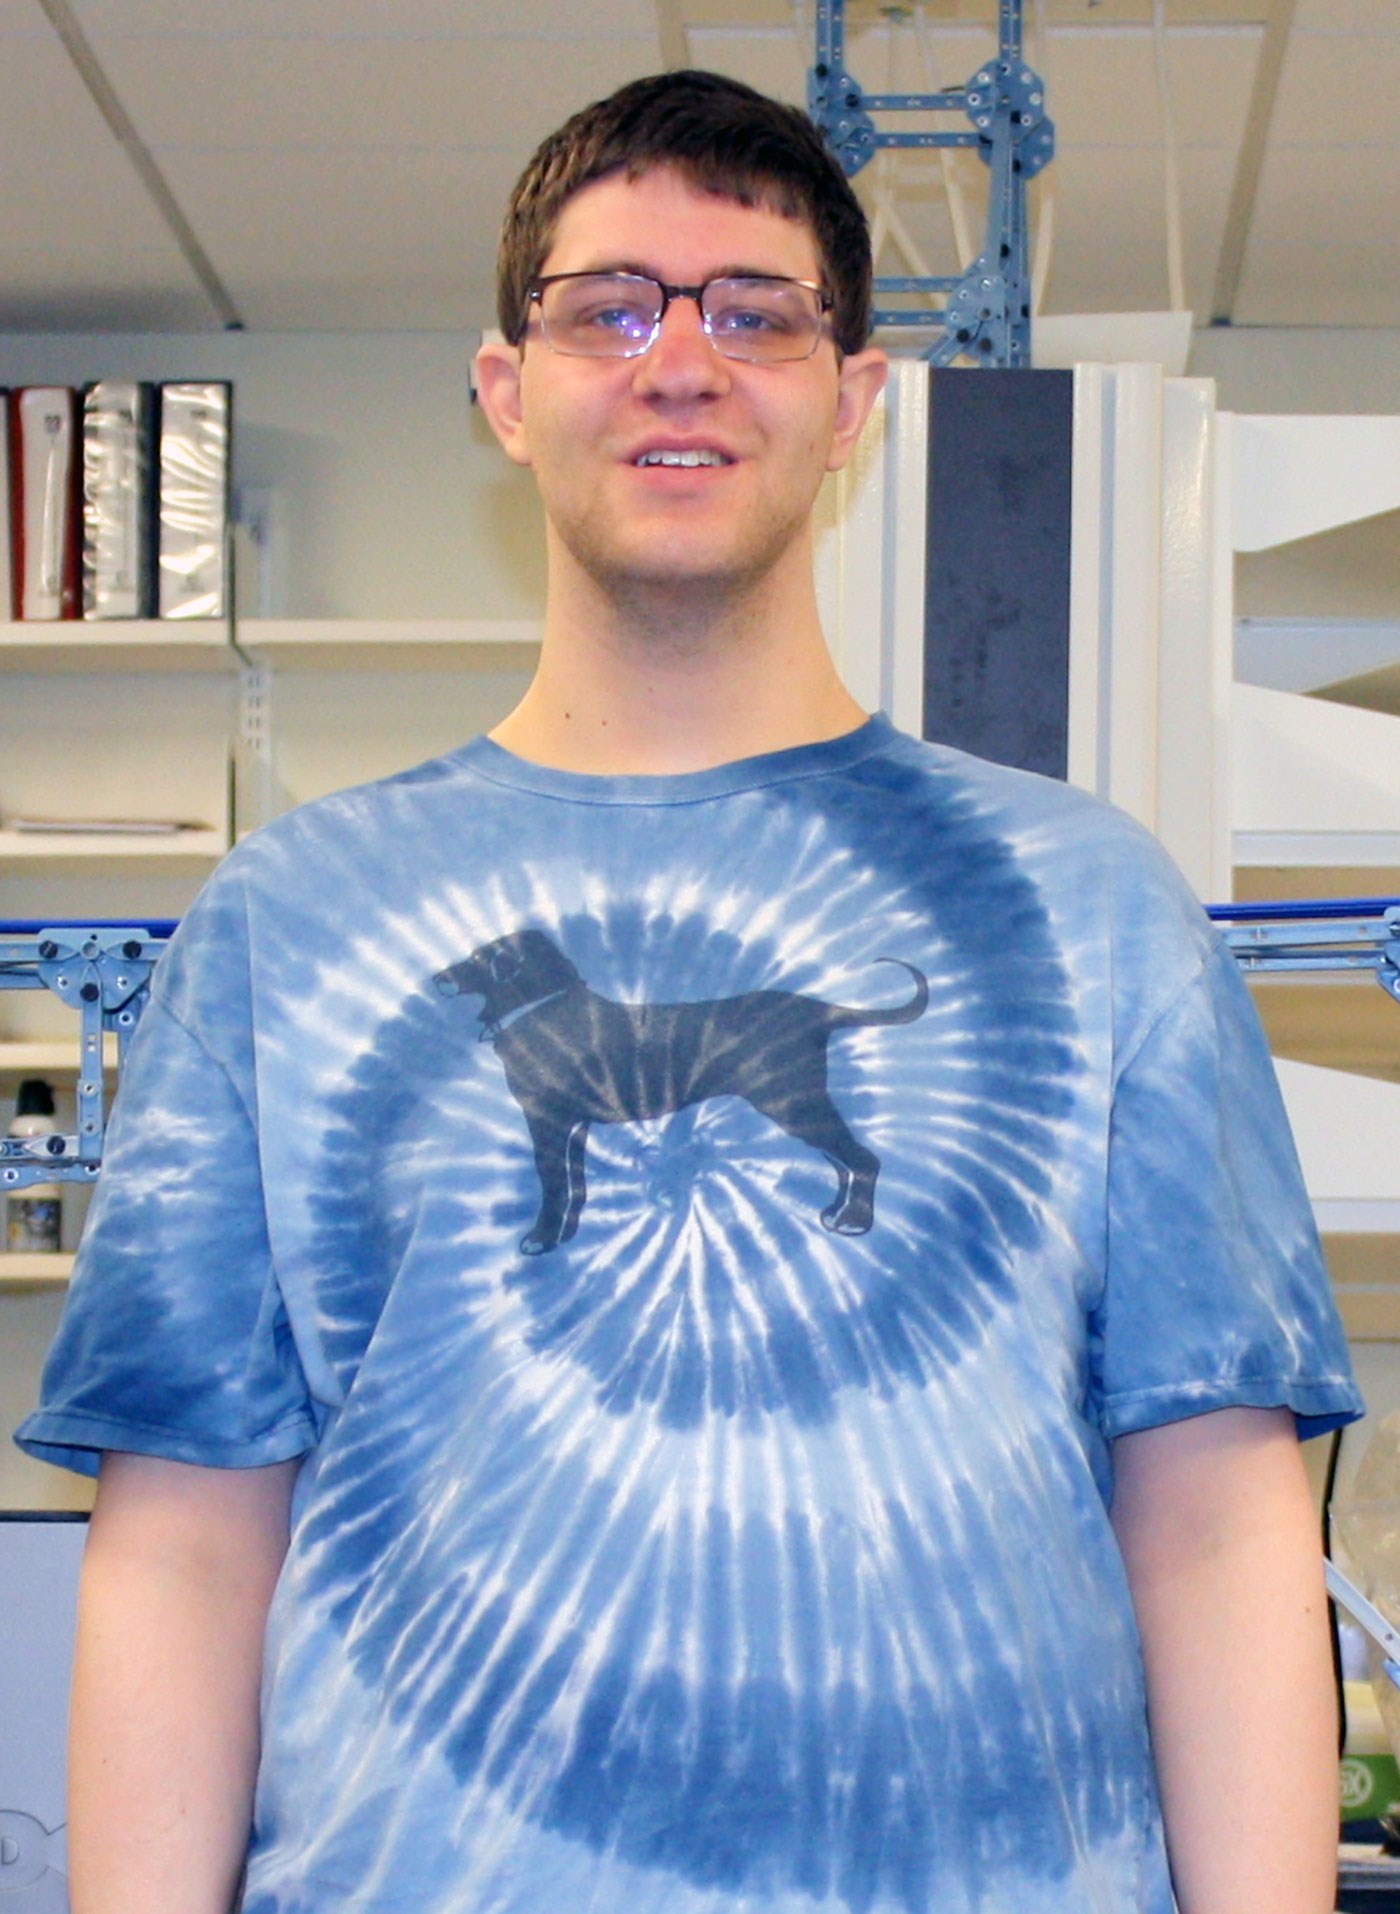 Benjamin Roth is an Undergraduate Research Assistant in the department of Mechanical Engineering